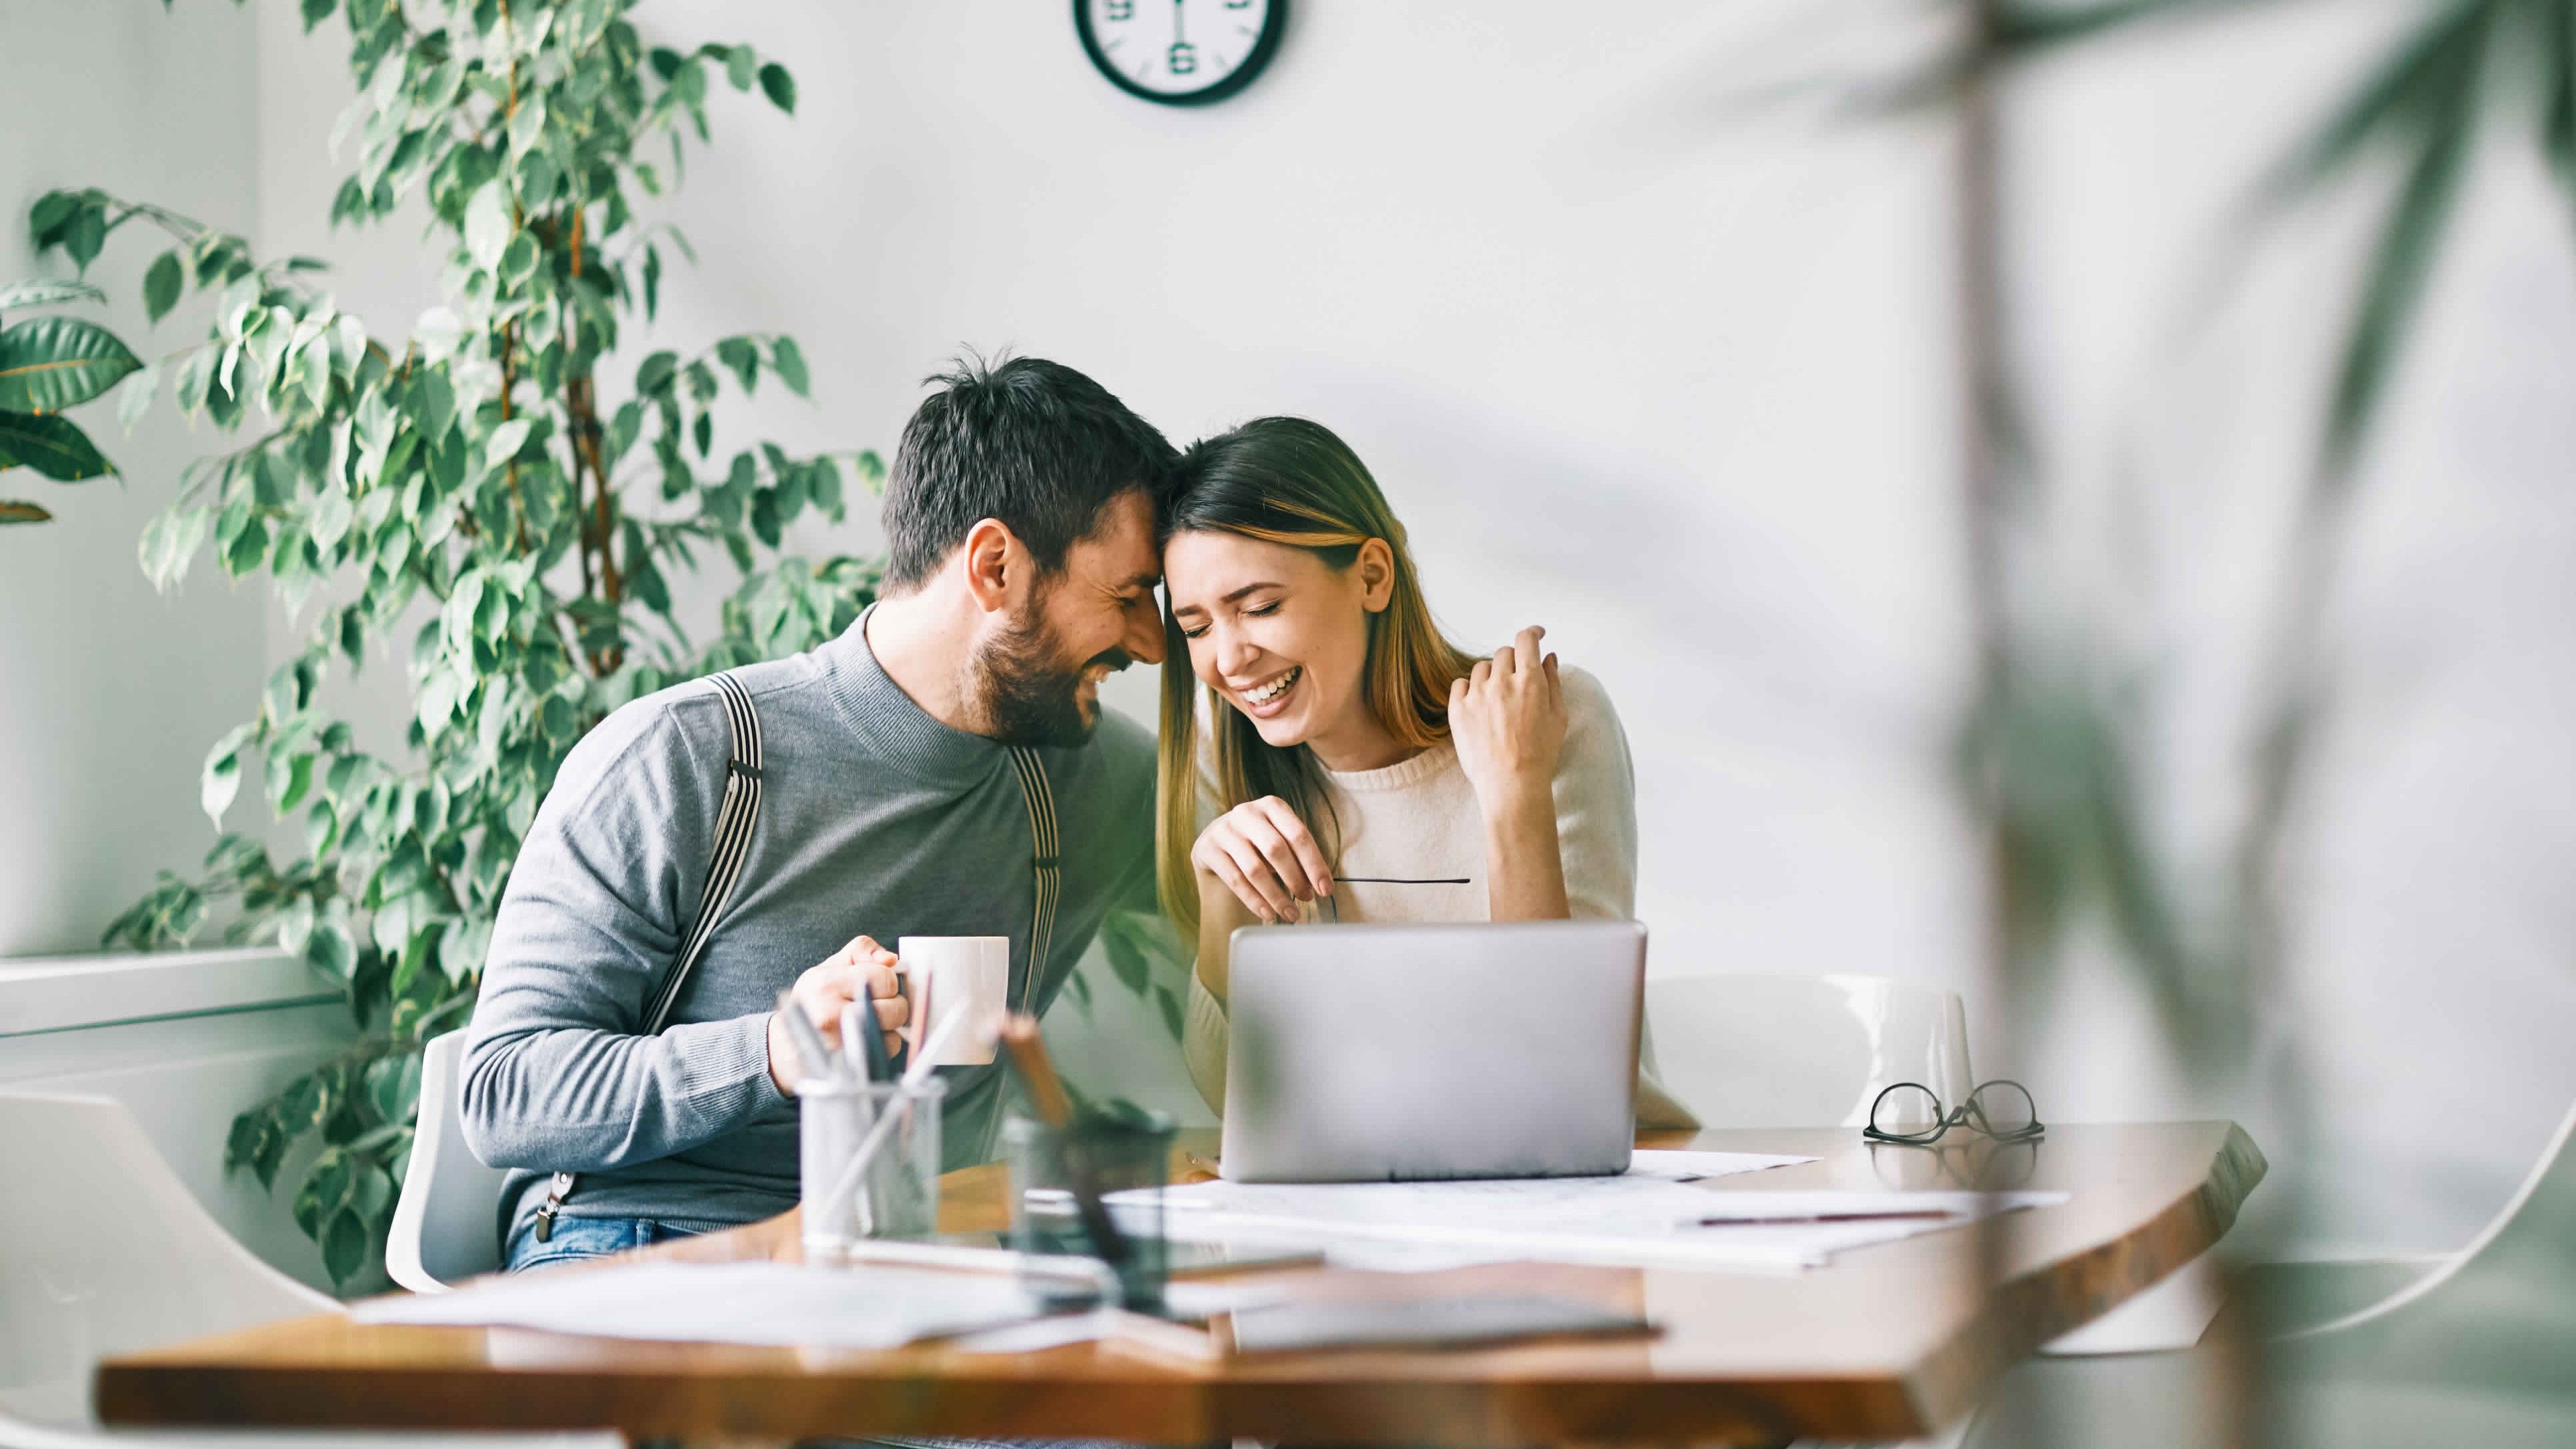 Smiling couple working at home or in the office with laptop